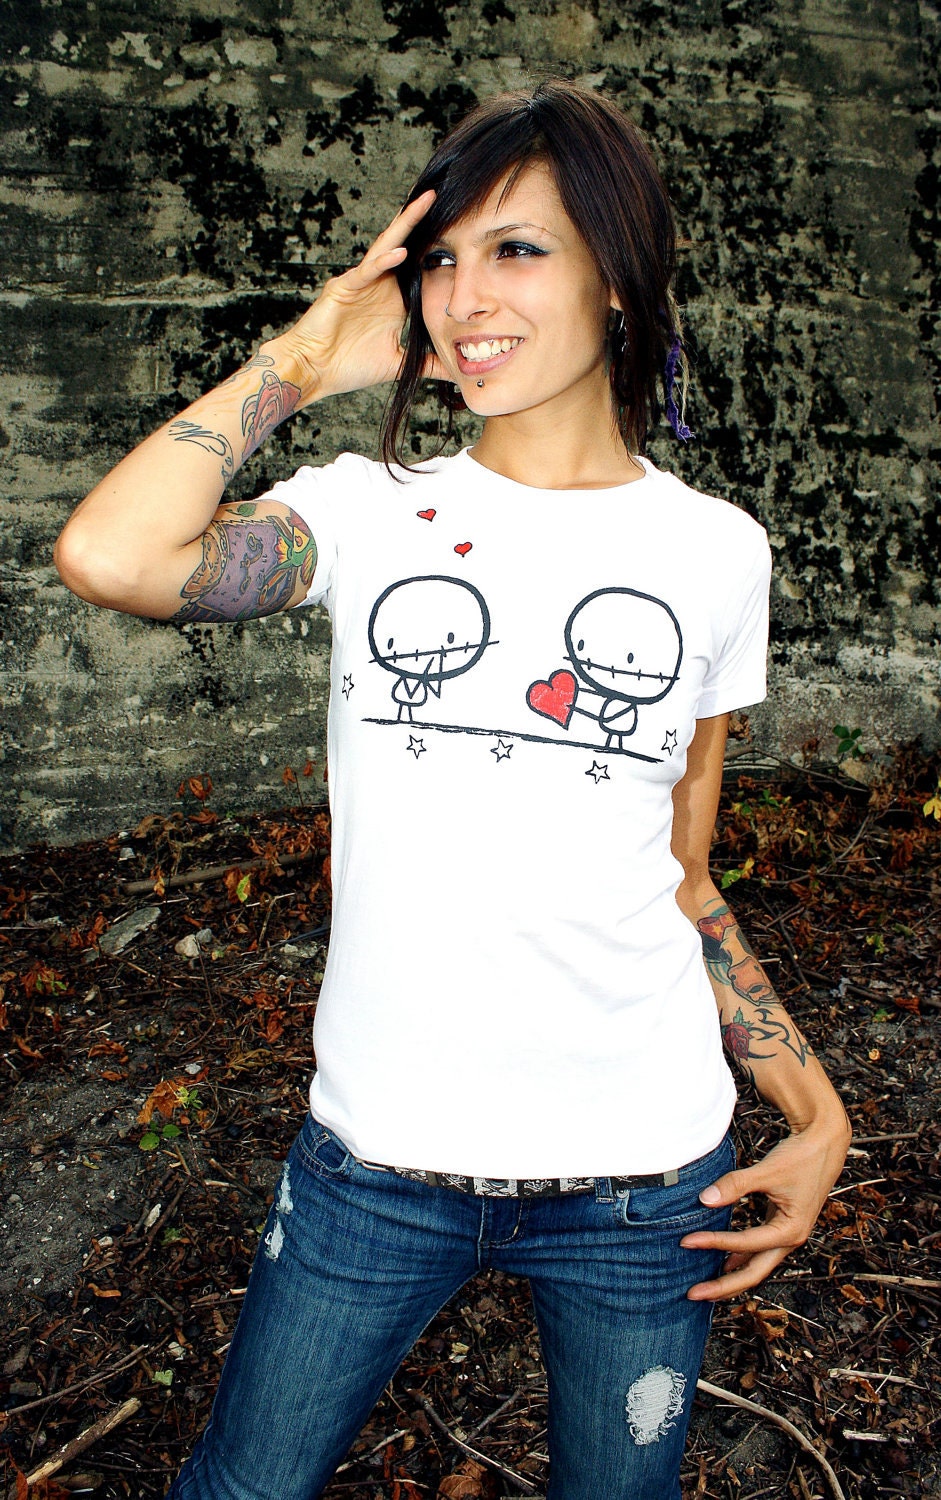 Medium Zombie Lovers White T-shirt womens Ladies by Rocky the Zombie